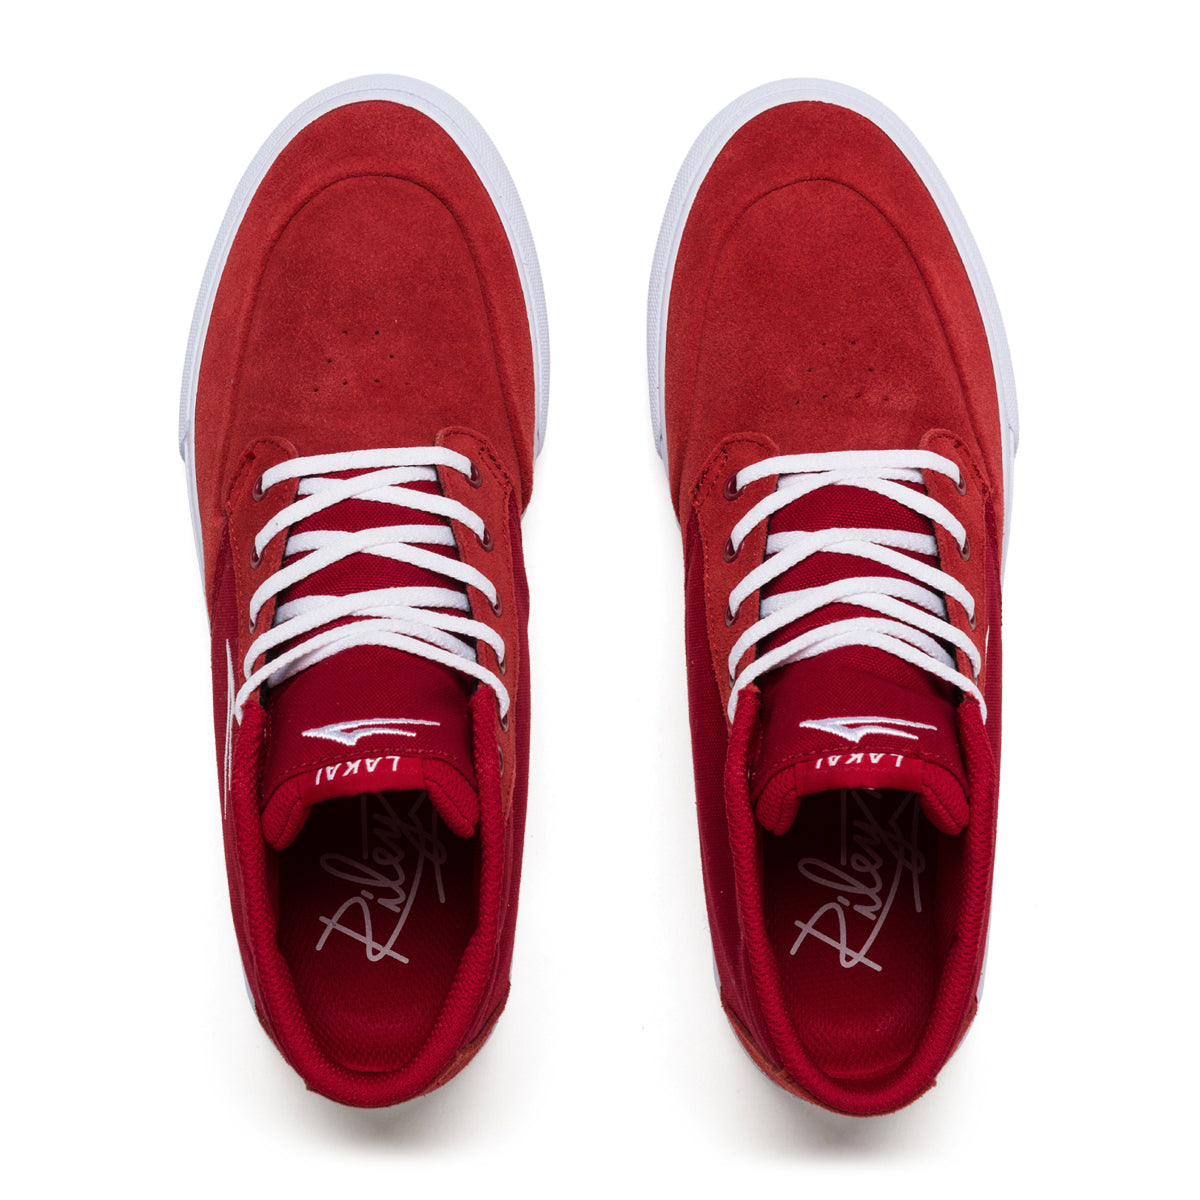 Lakai Riley 3 High - Red Suede Skate Shoes